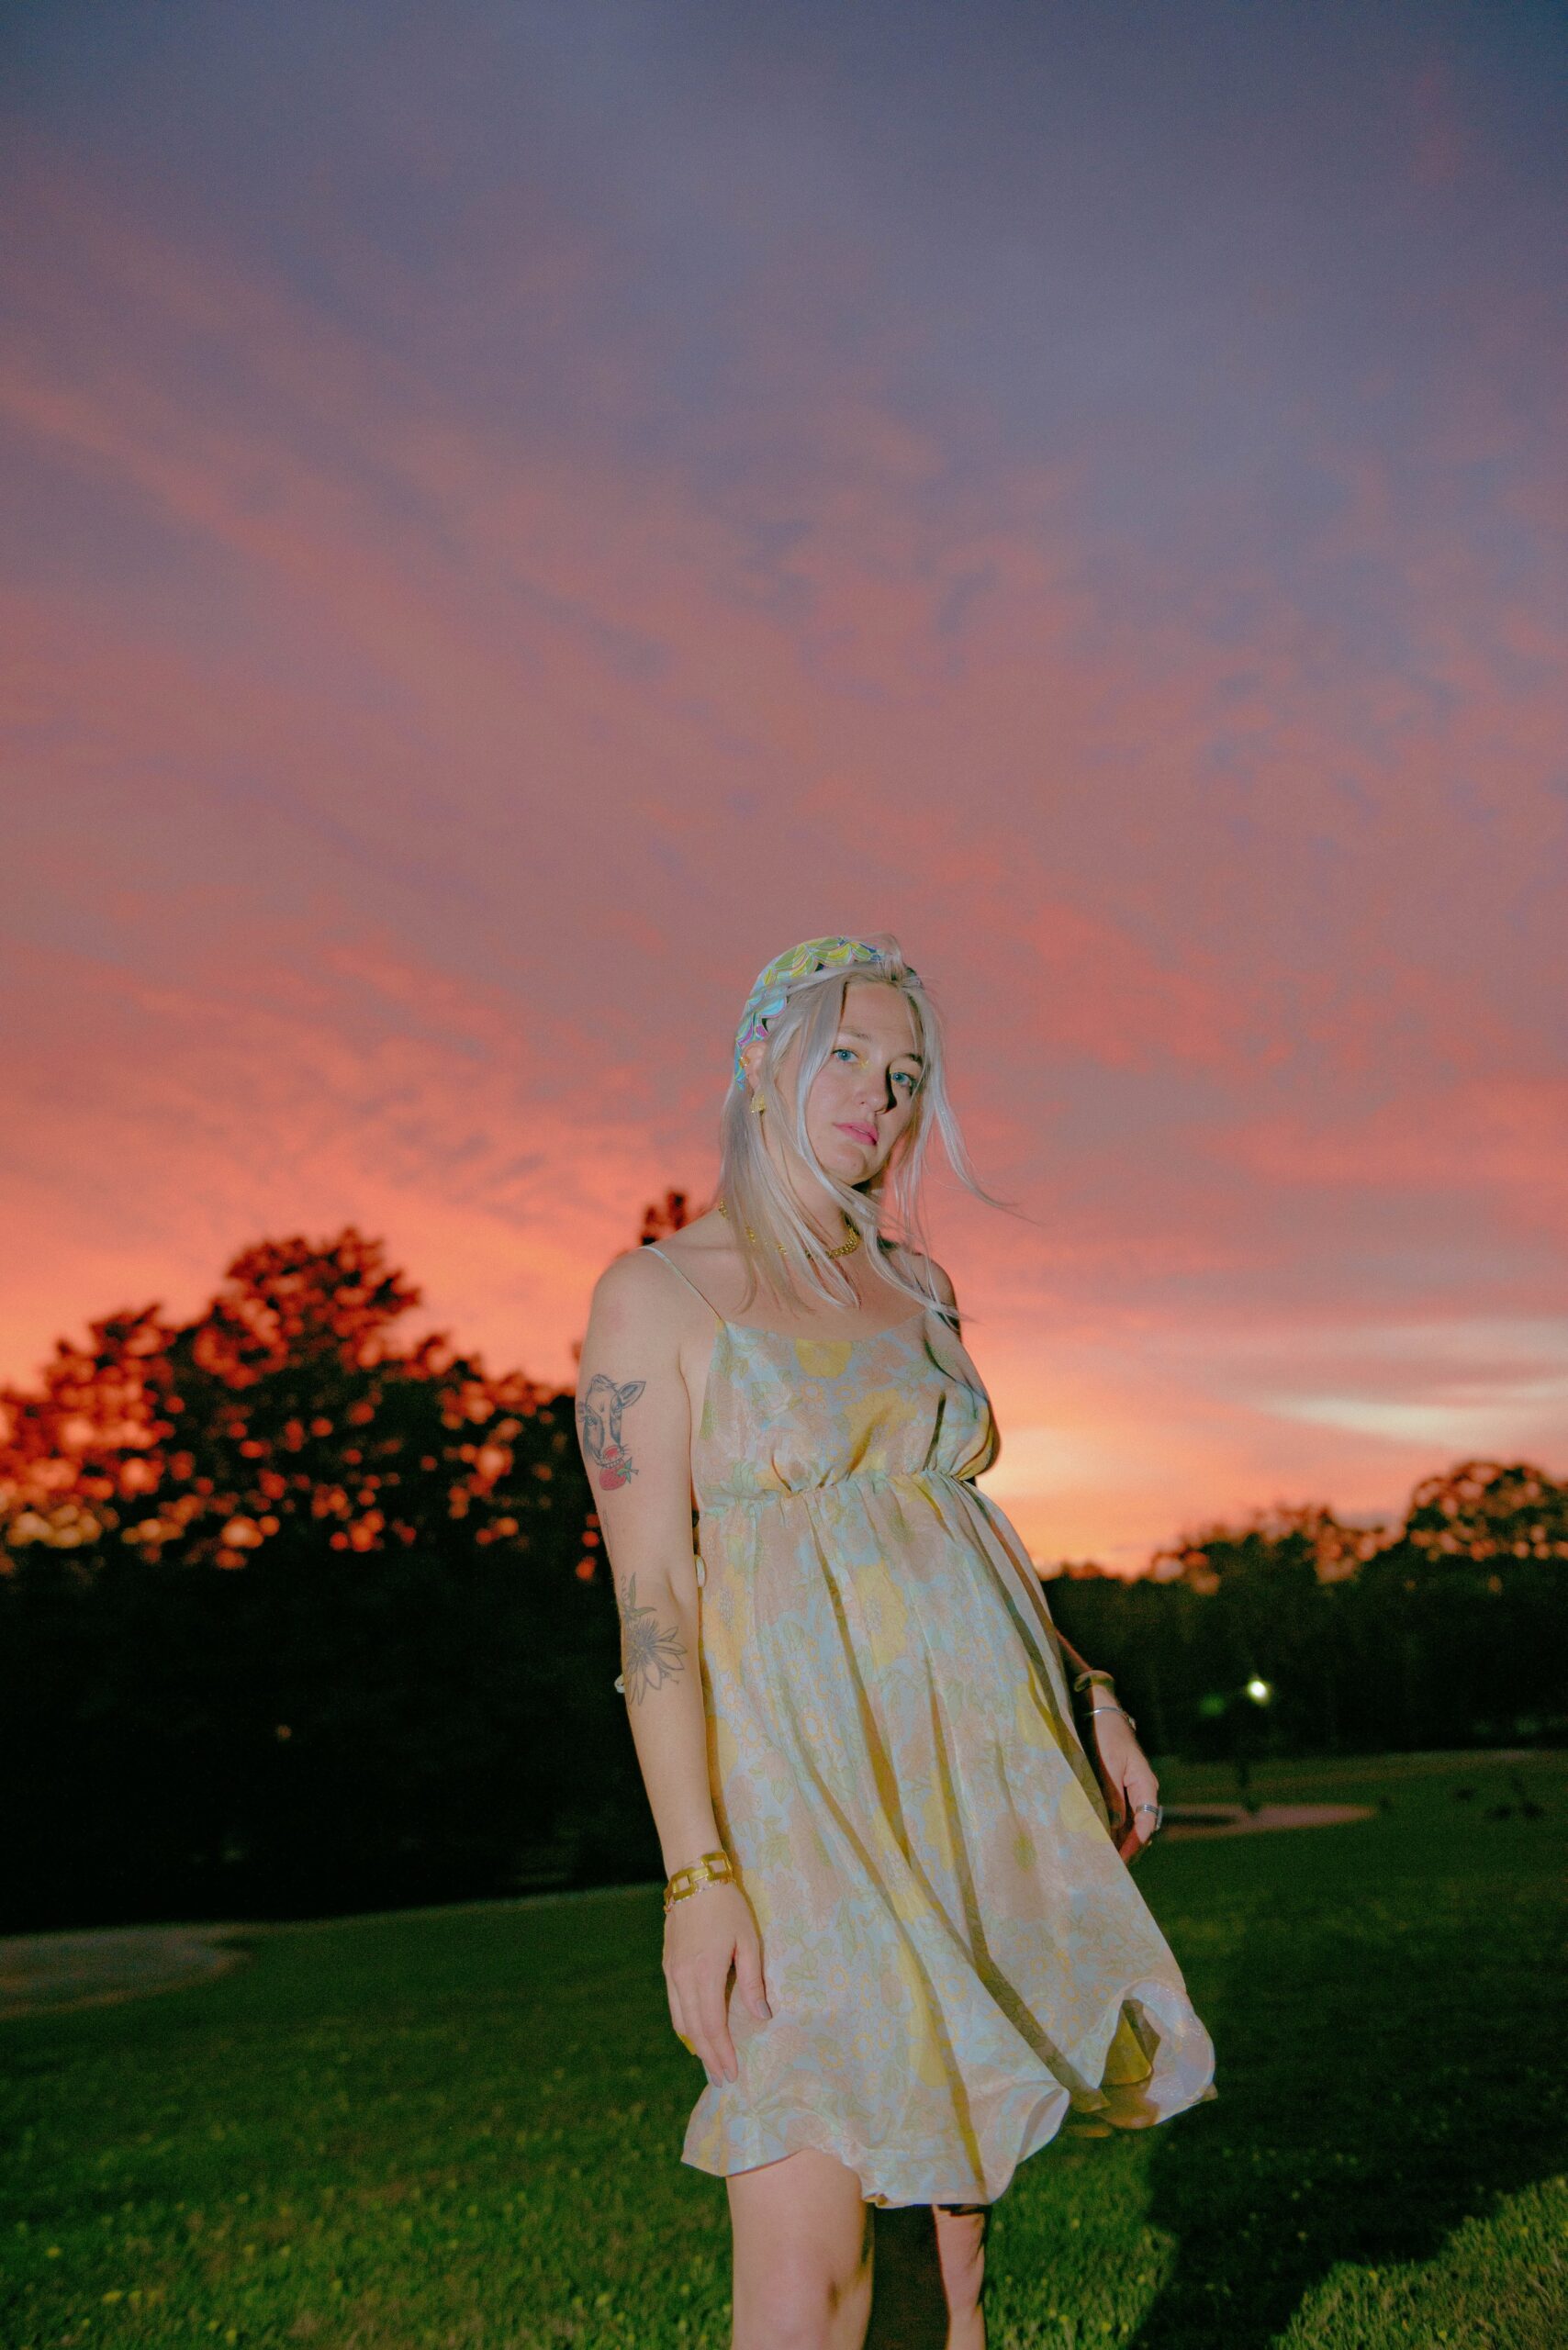 Woman wearing a sundress and flower crown stands in a field at sunset.